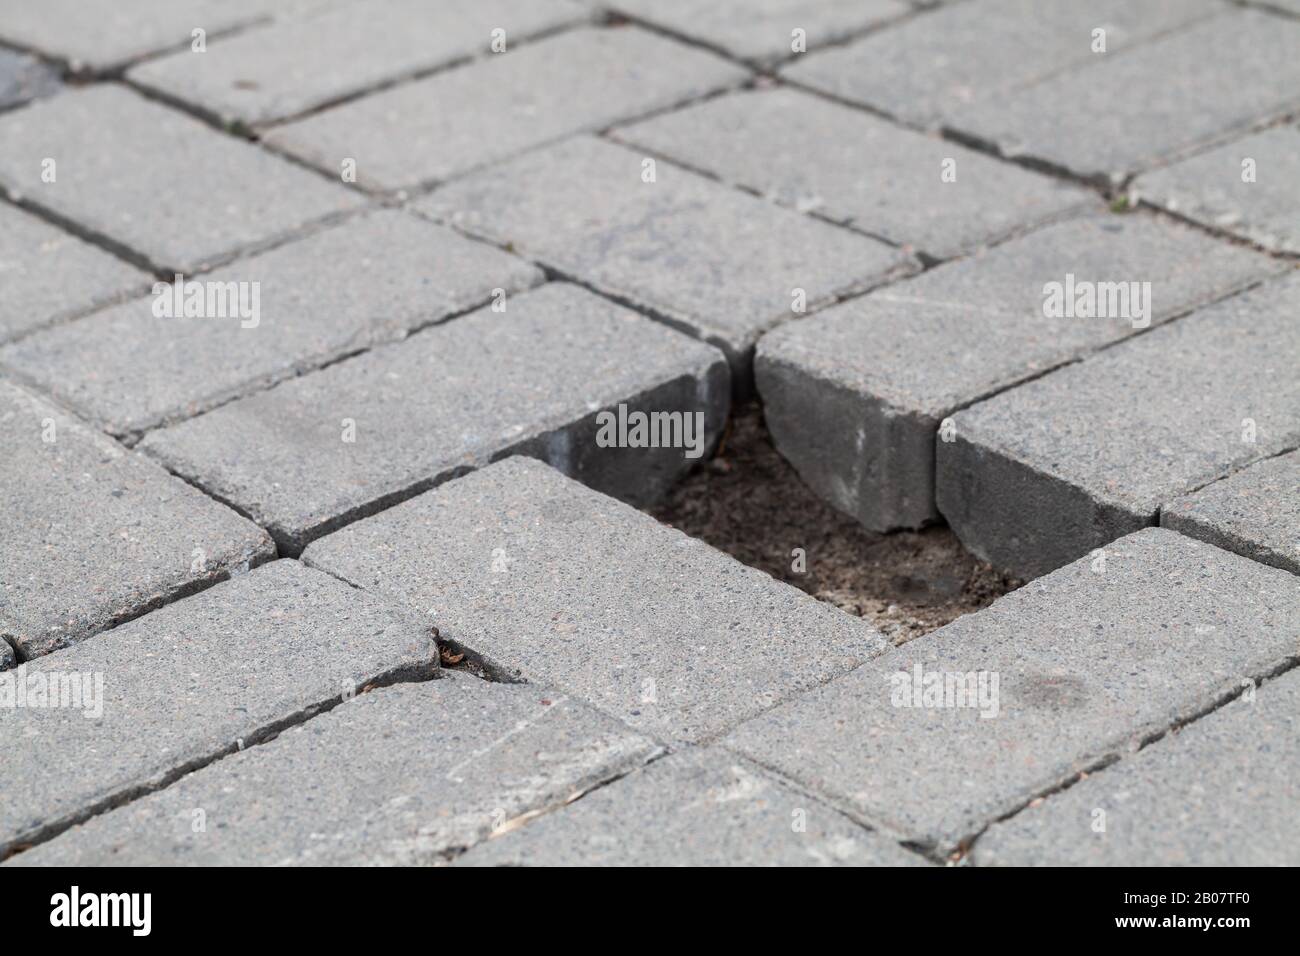 Gray cobblestone road pavement with hole of missed block, close-up photo with selective soft focus Stock Photo